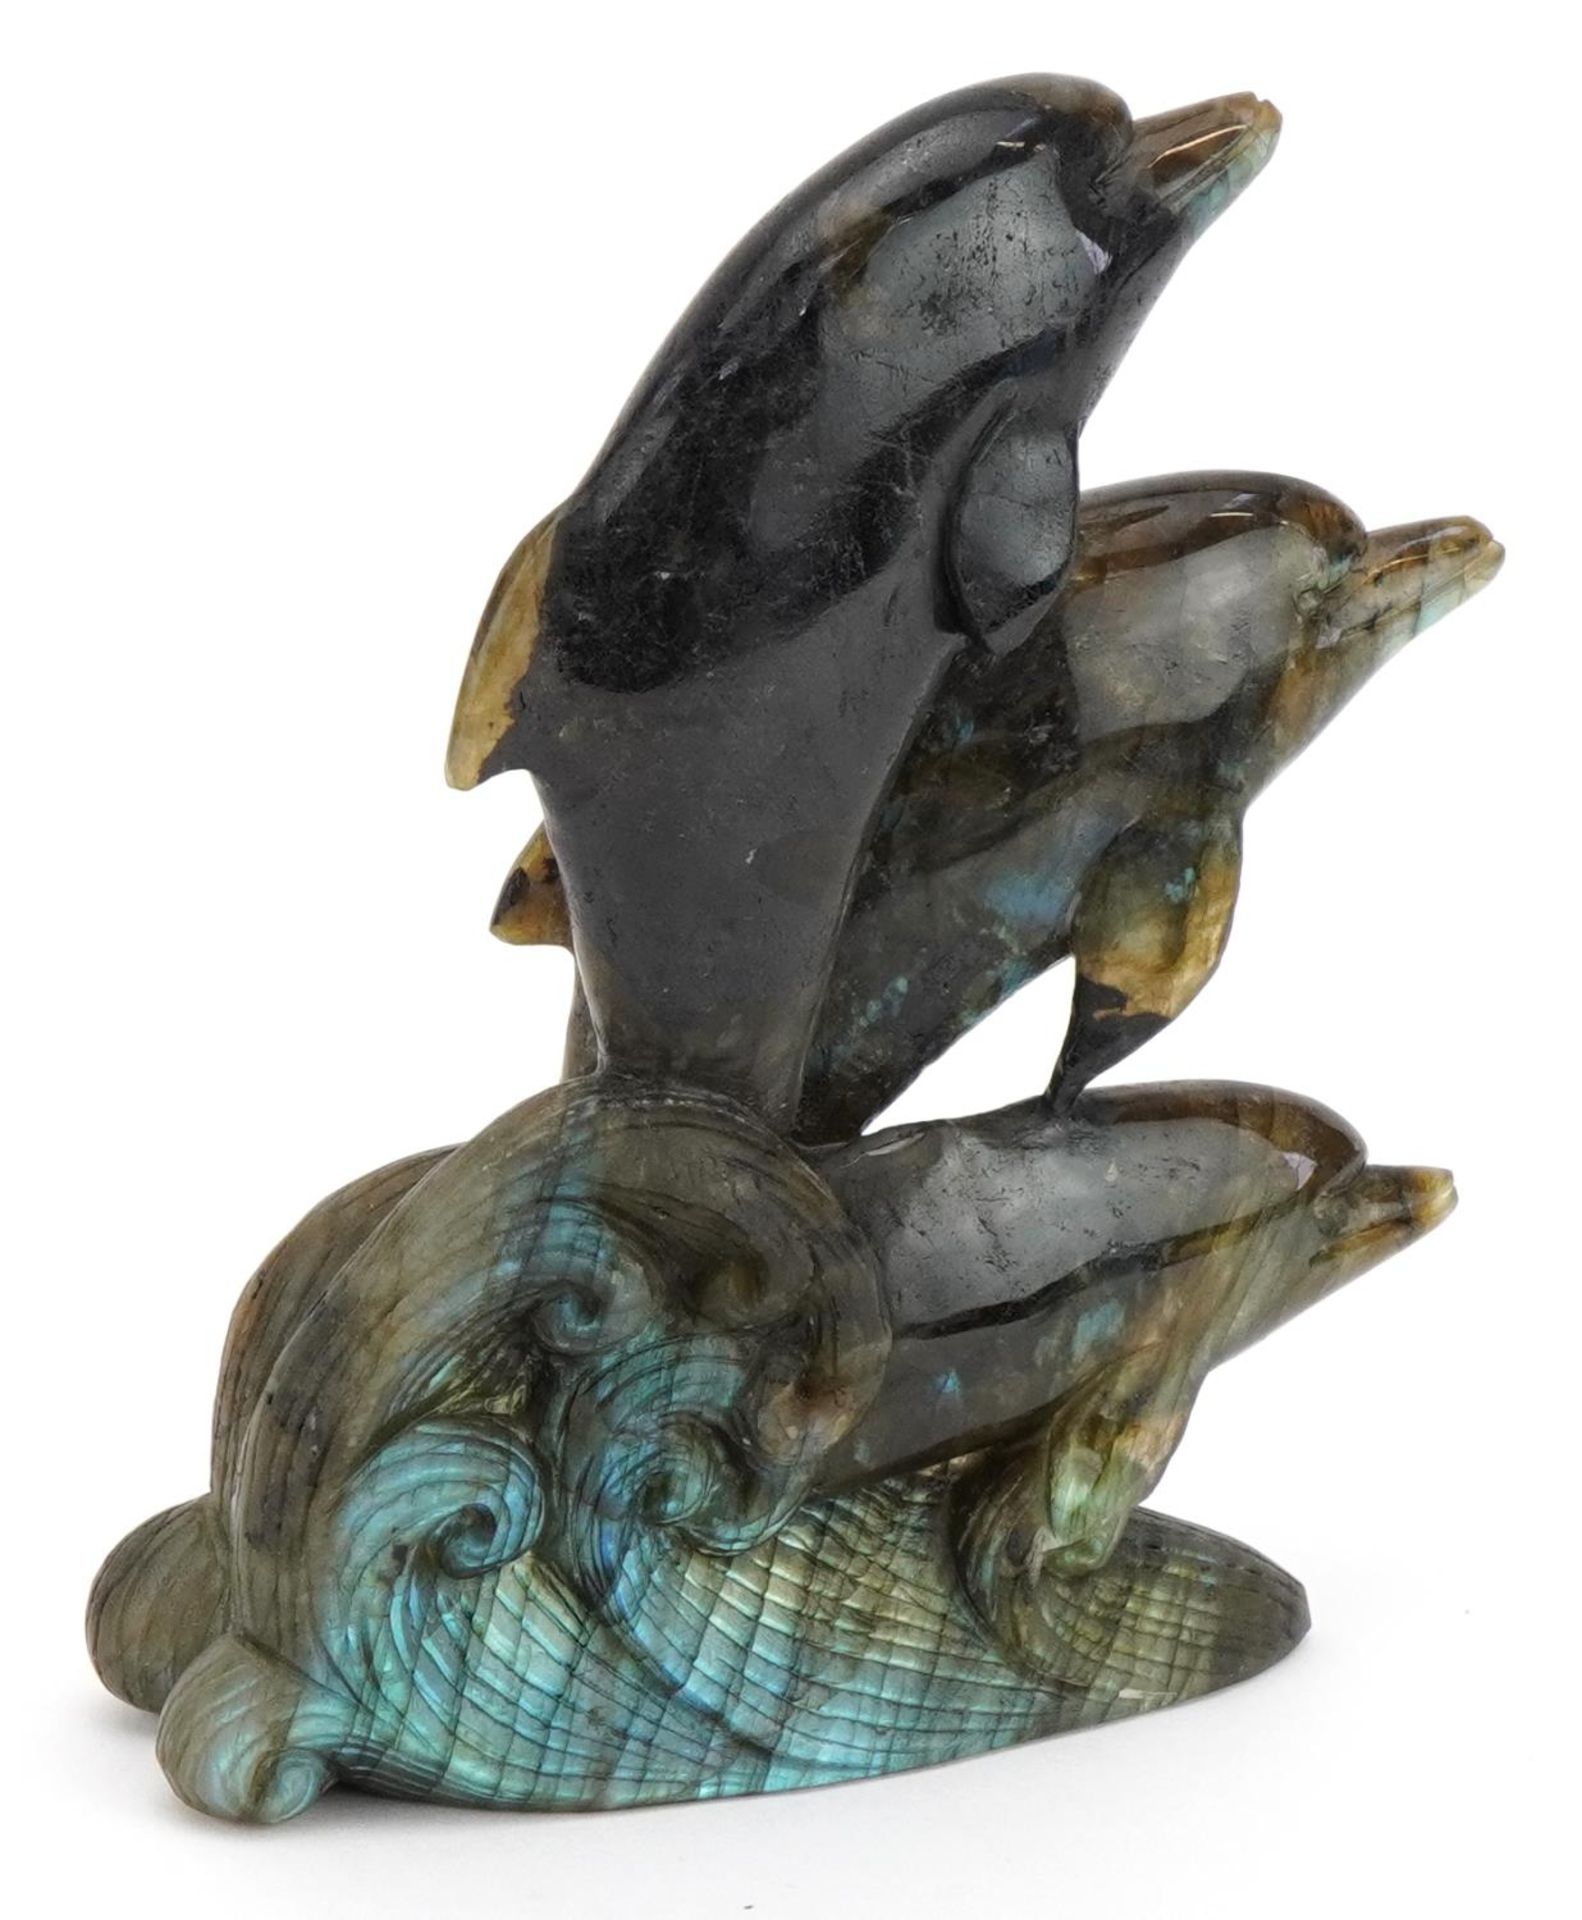 Labradorite carving of three dolphins, 15cm high - Image 4 of 6